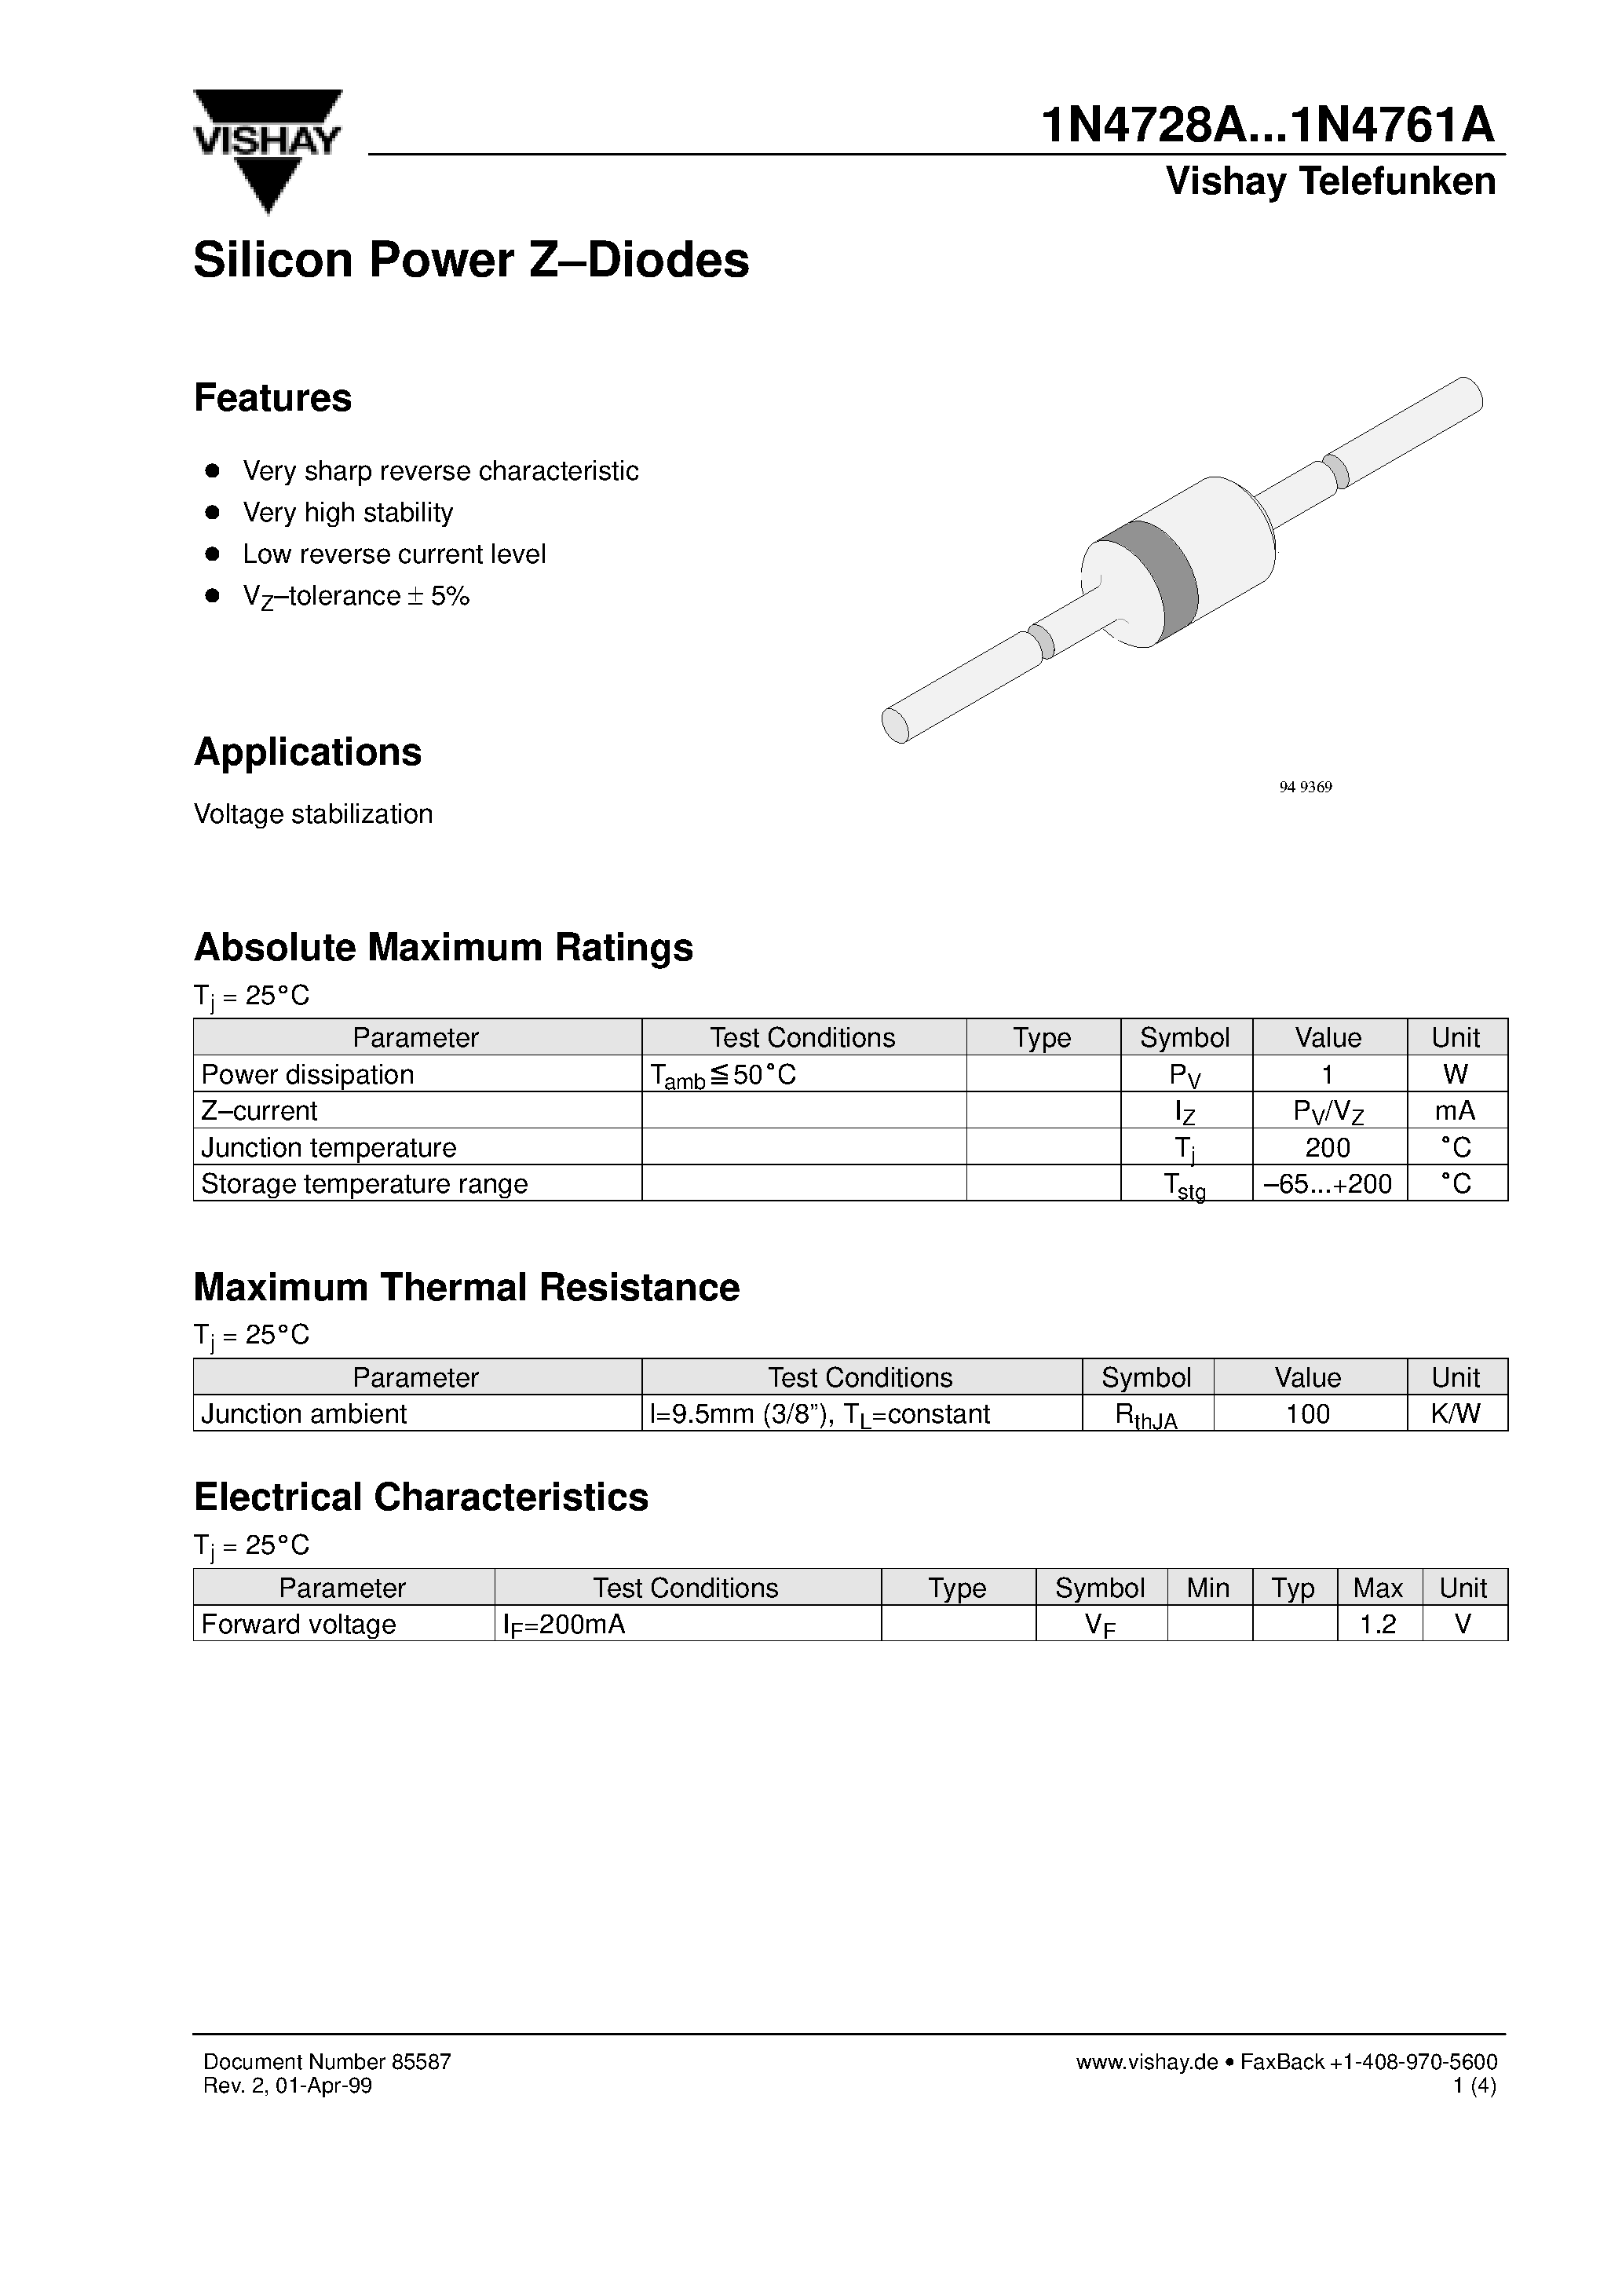 Datasheet 1N4759A - Silicon Power Z-Diodes page 1